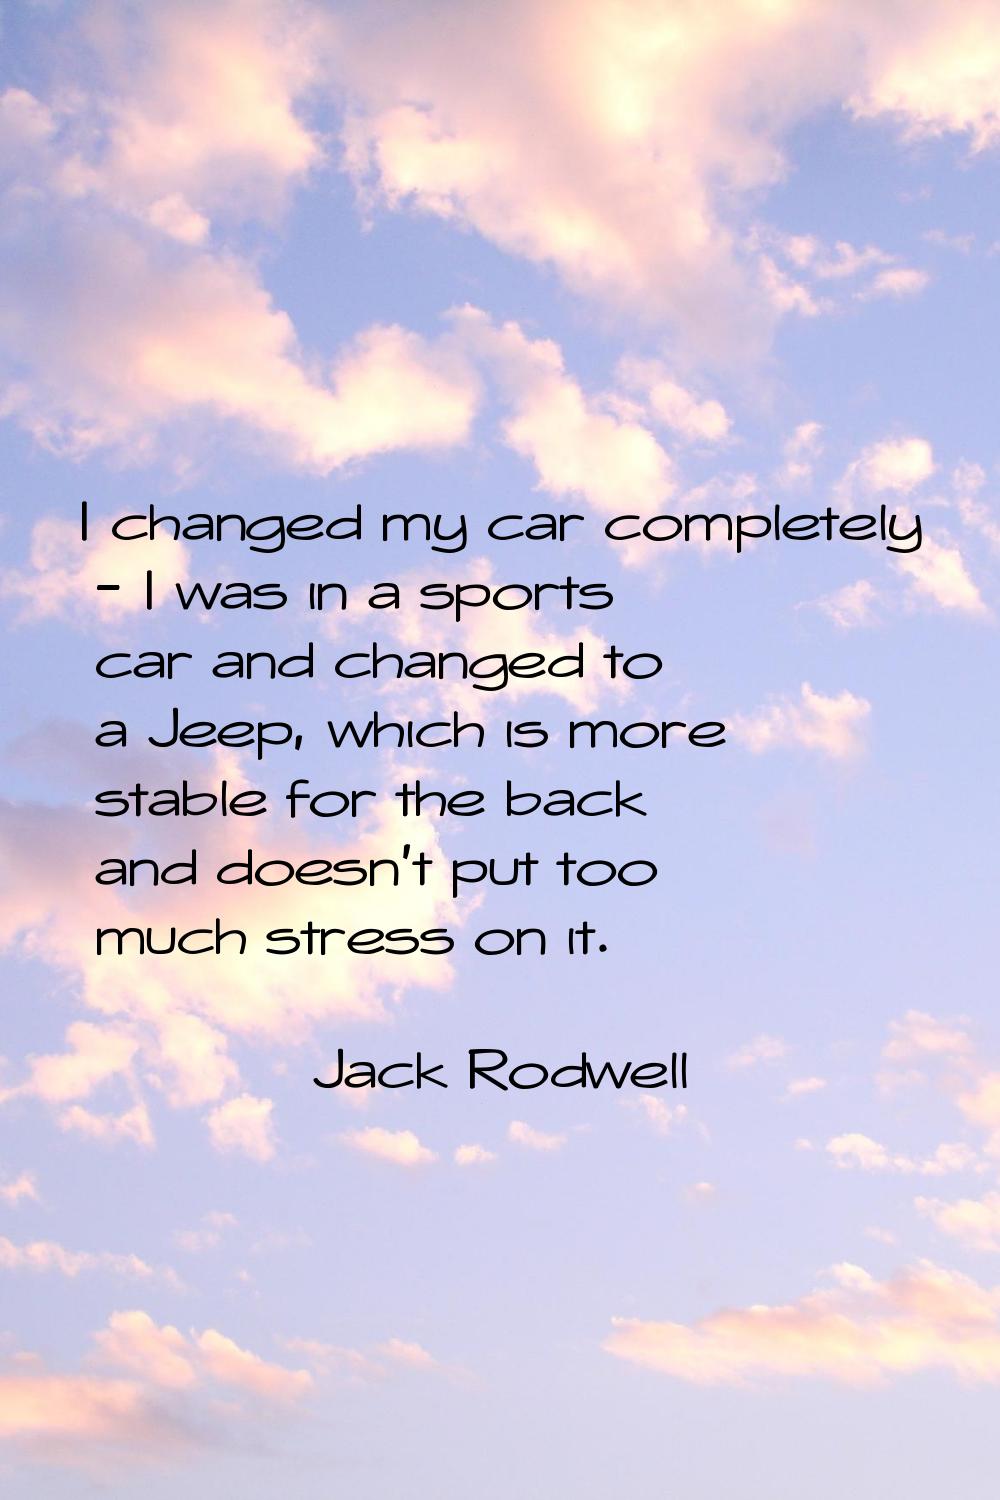 I changed my car completely - I was in a sports car and changed to a Jeep, which is more stable for